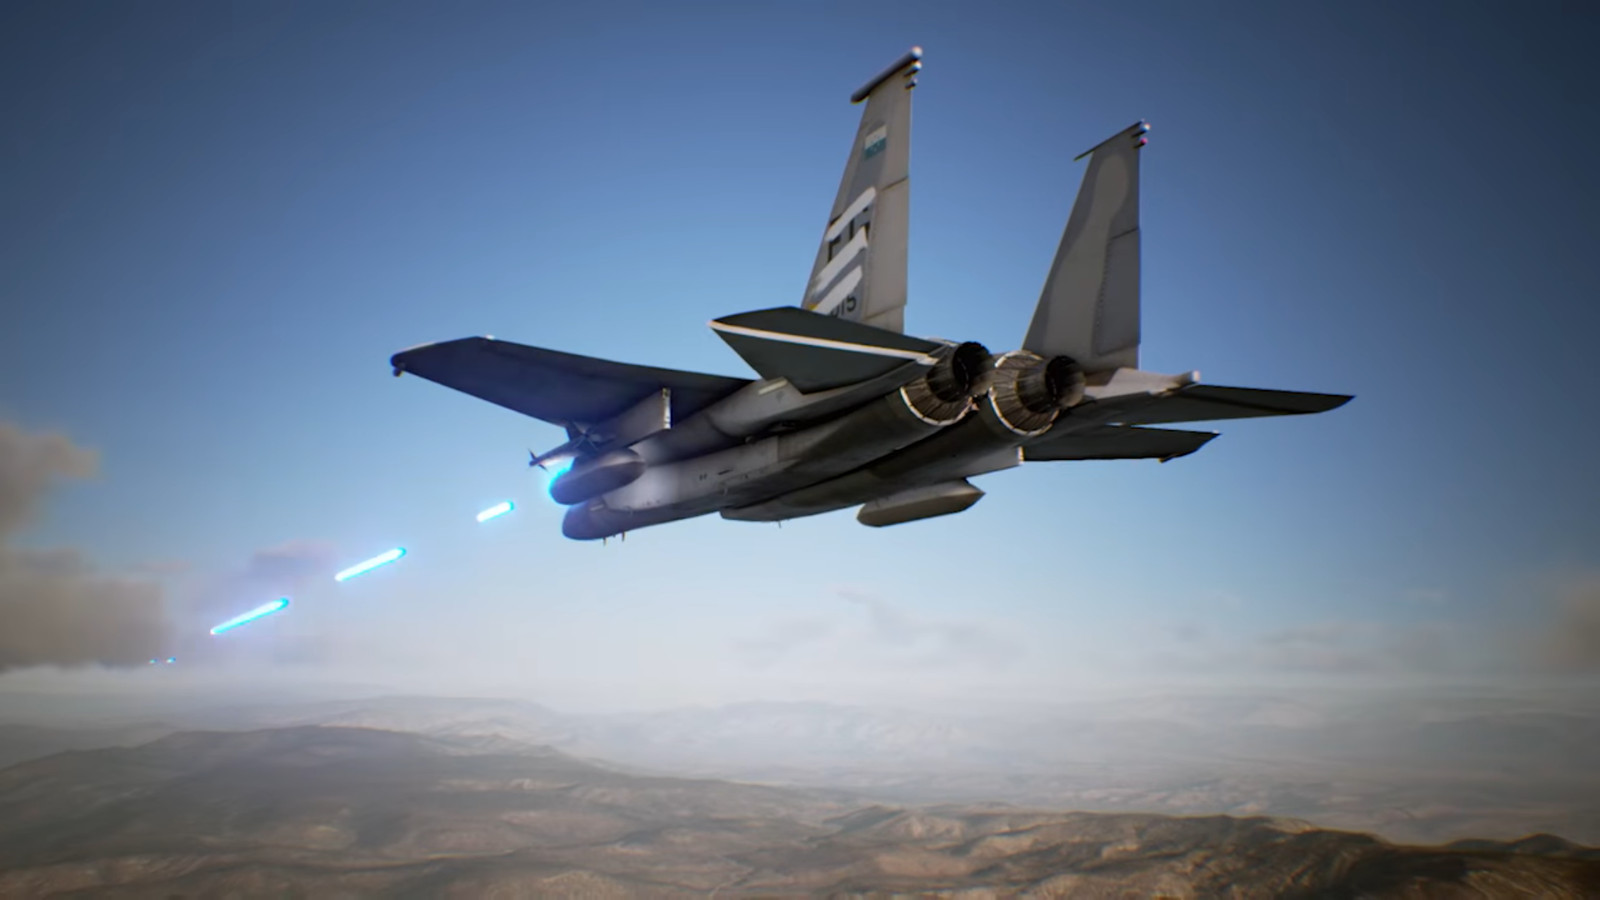  Ace Combat 7: Skies Unknown - Xbox One : Bandai Namco Games  Amer: Everything Else